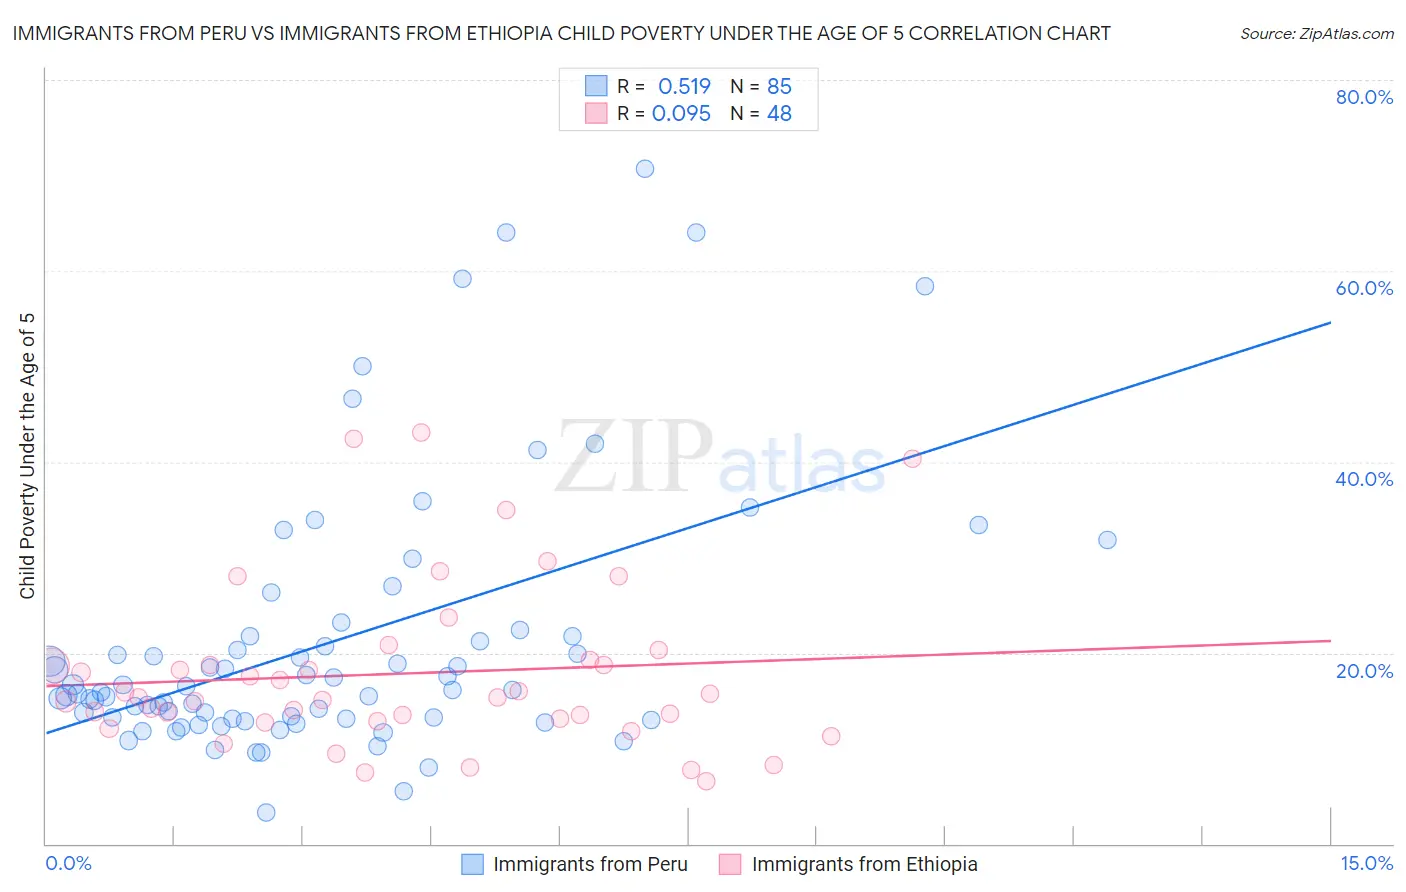 Immigrants from Peru vs Immigrants from Ethiopia Child Poverty Under the Age of 5